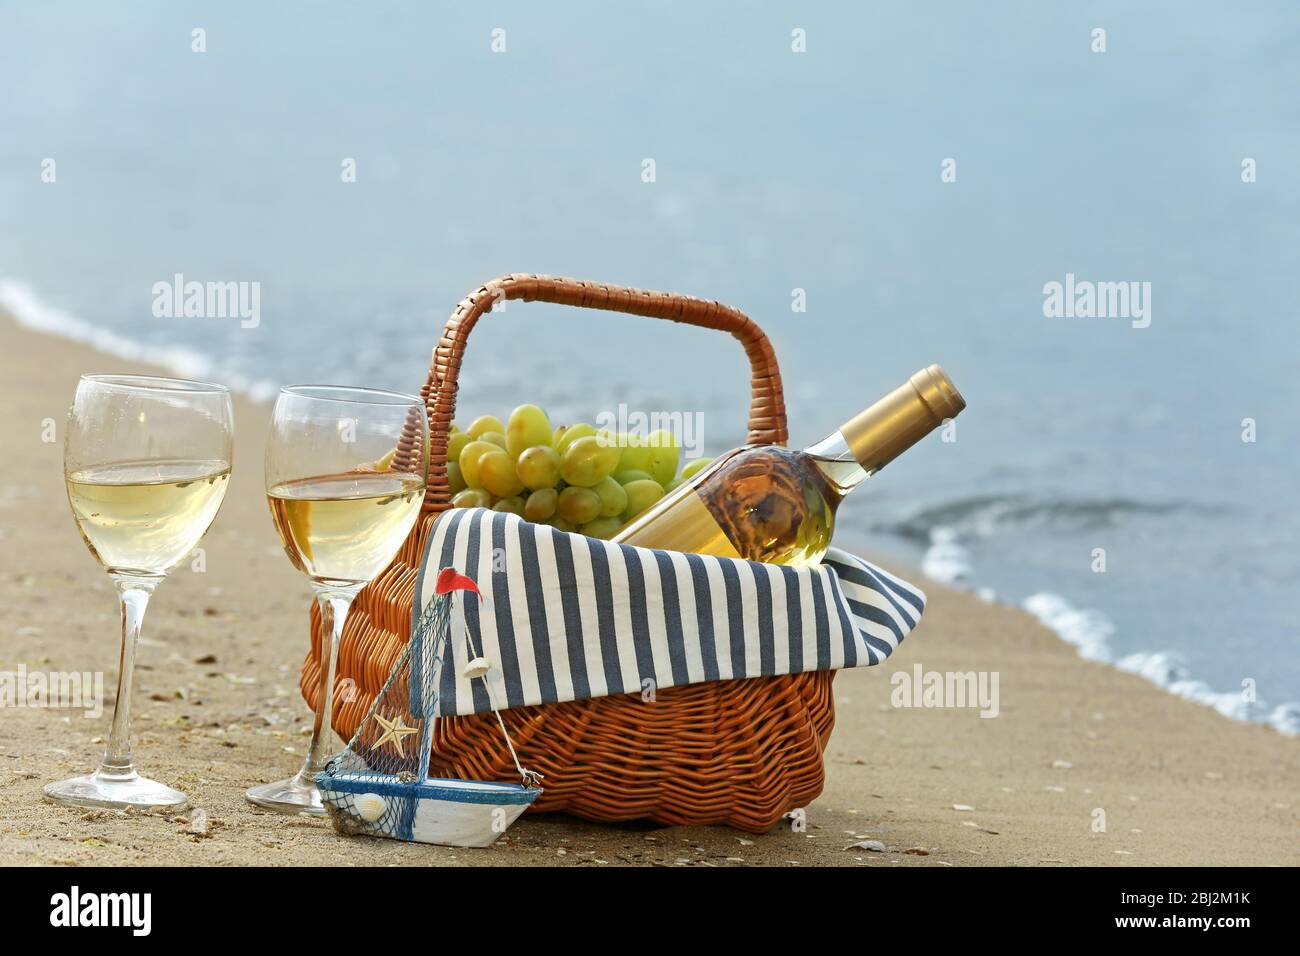 Picnic basket with bottle of wine on sand beach Stock Photo - Alamy